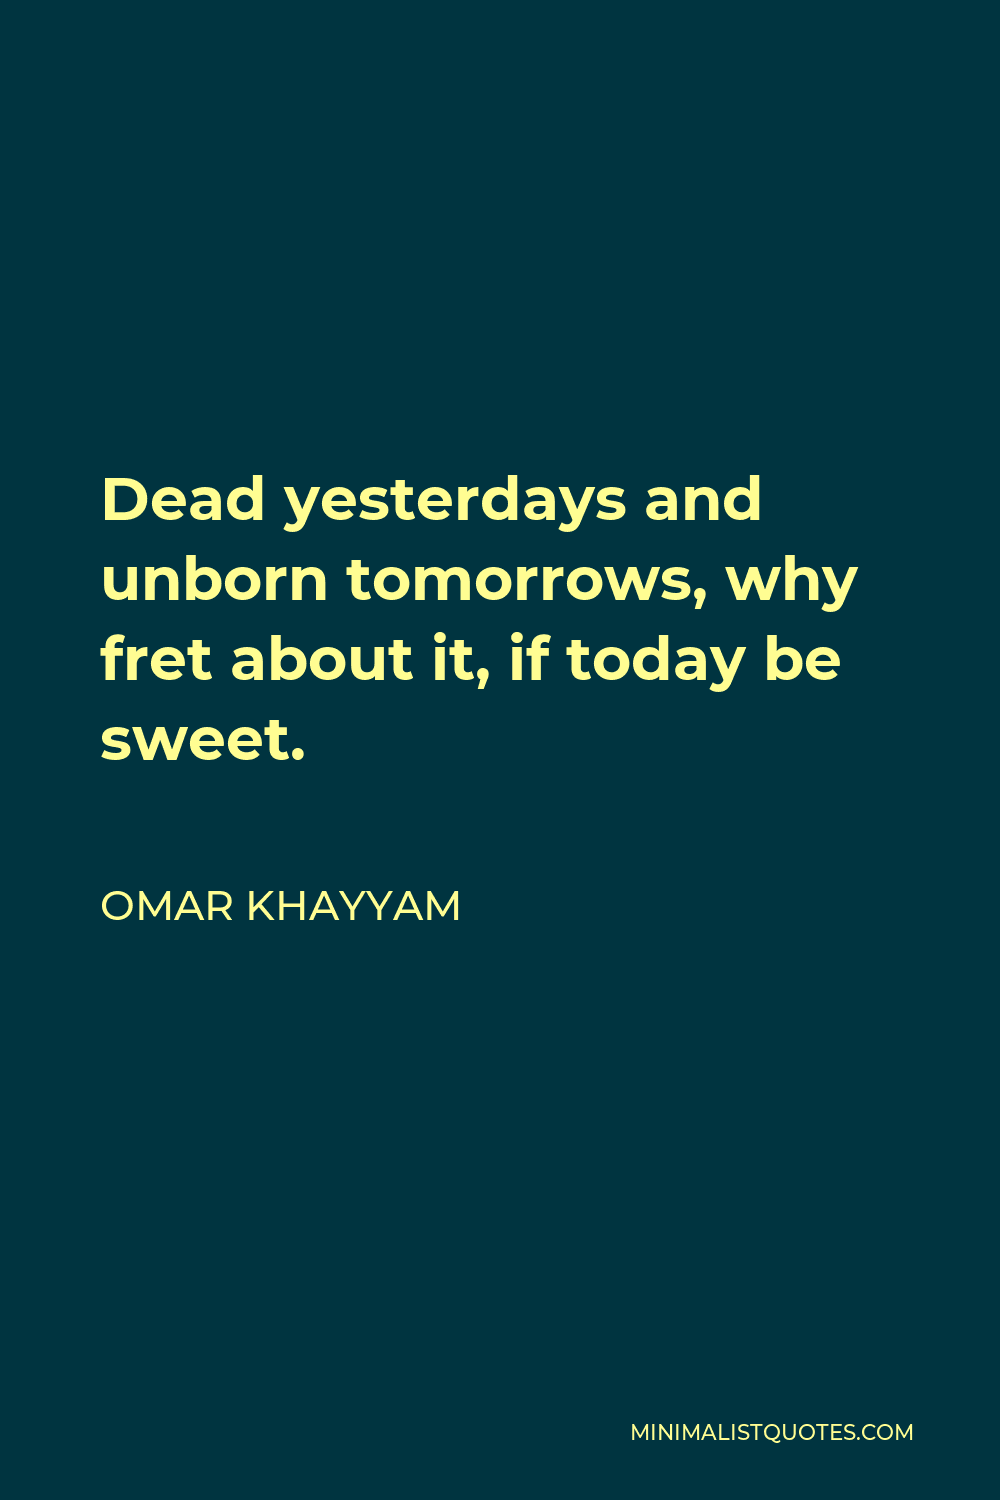 Omar Khayyam Quote - Dead yesterdays and unborn tomorrows, why fret about it, if today be sweet.